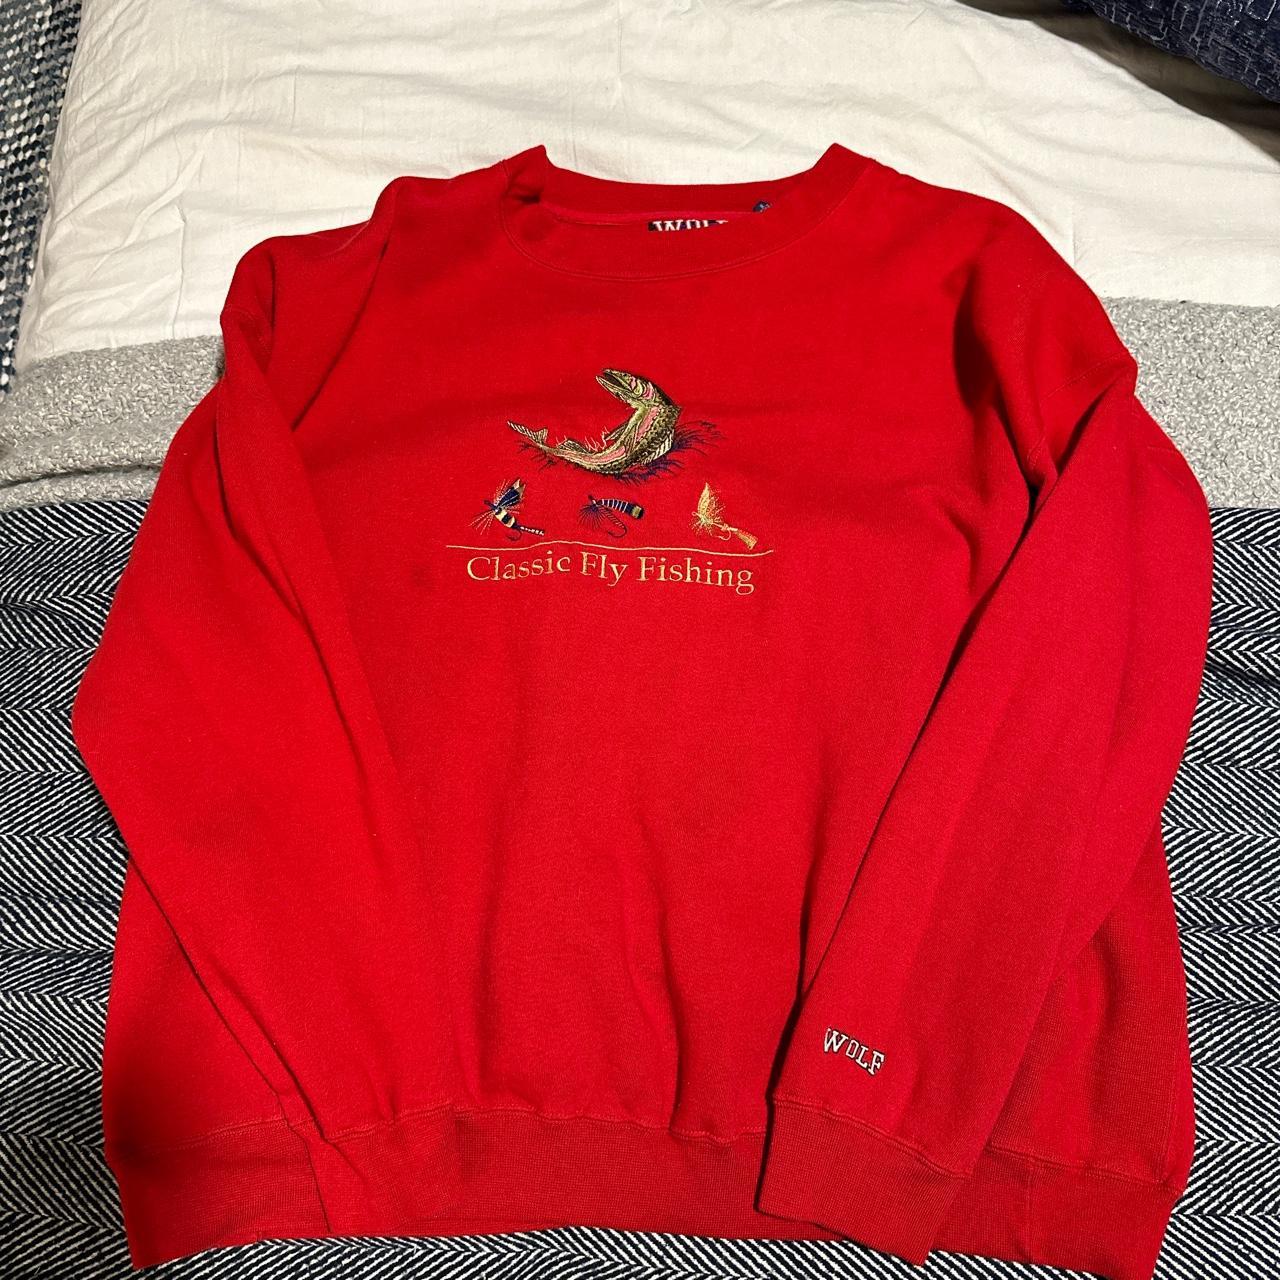 Vintage Classic Fly Fishing Crewneck. Size